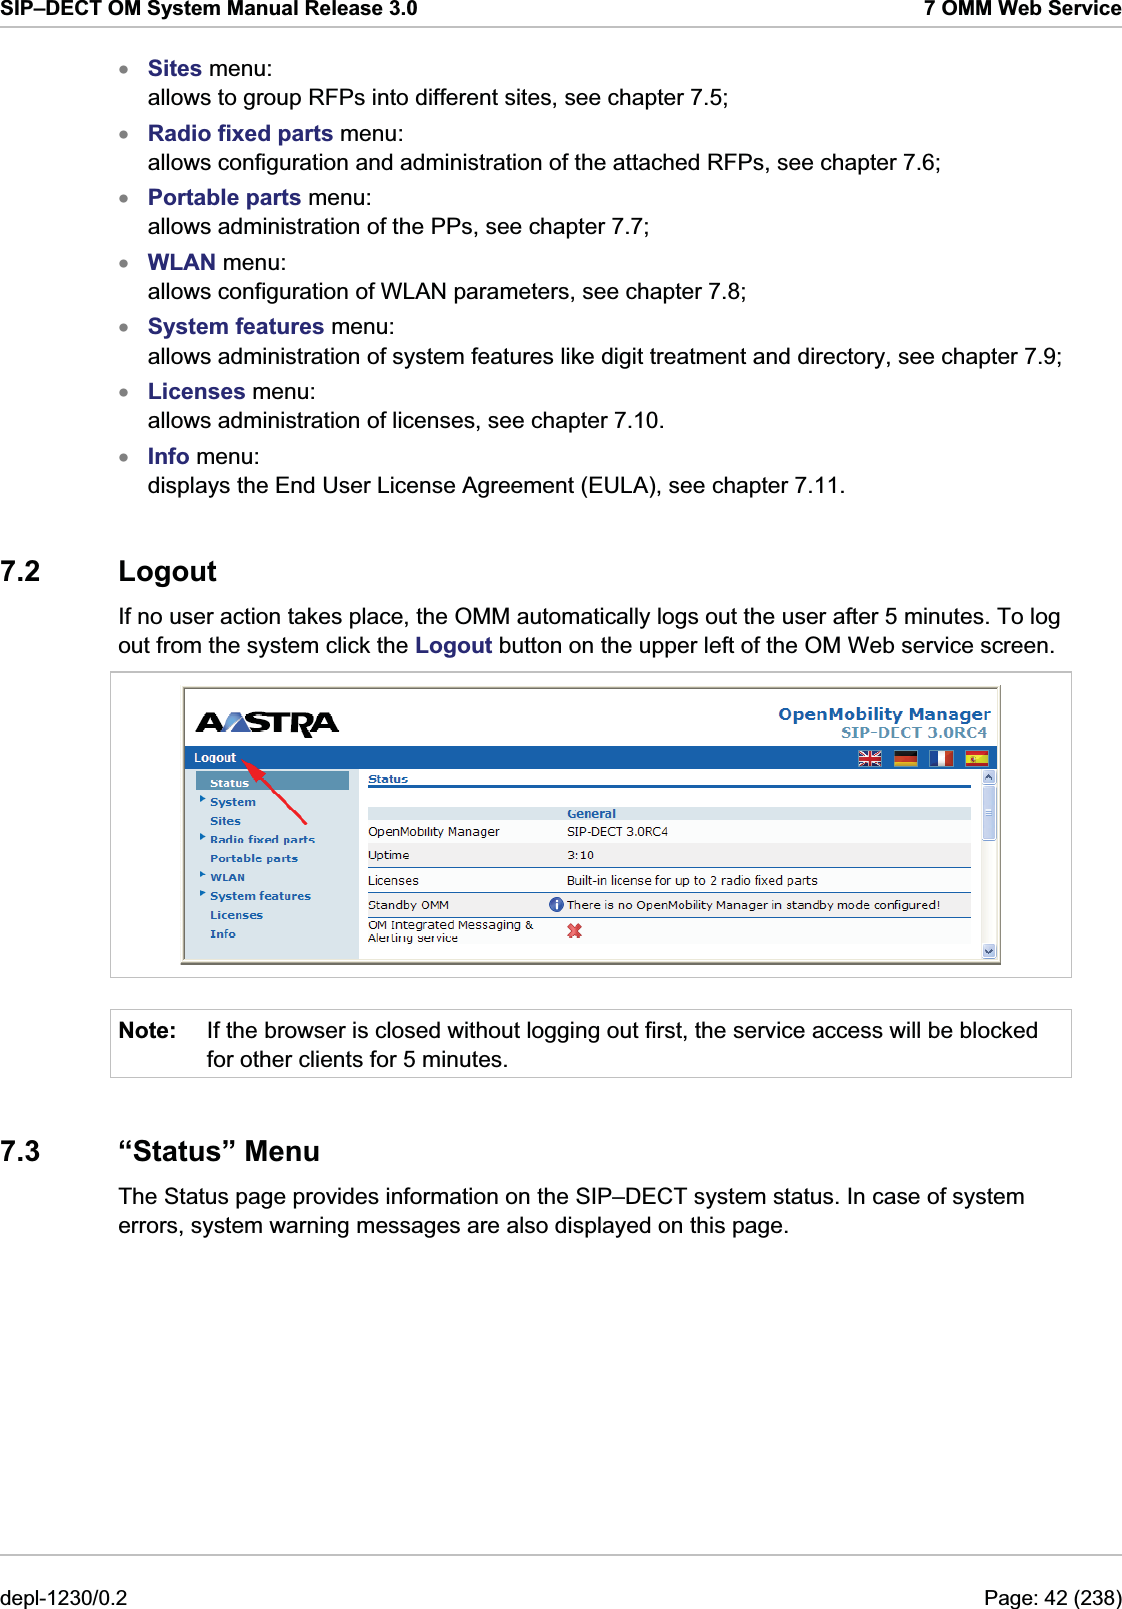 SIP–DECT OM System Manual Release 3.0  7 OMM Web Service Sites menu:  allows to group RFPs into different sites, see chapter 7.5;  xxxxxxxRadio fixed parts menu:  allows configuration and administration of the attached RFPs, see chapter 7.6; Portable parts menu:  allows administration of the PPs, see chapter 7.7;  WLAN menu:  allows configuration of WLAN parameters, see chapter 7.8;  System features menu:  allows administration of system features like digit treatment and directory, see chapter 7.9;  Licenses menu:  allows administration of licenses, see chapter 7.10. Info menu:  displays the End User License Agreement (EULA), see chapter 7.11.  7.2 Logout If no user action takes place, the OMM automatically logs out the user after 5 minutes. To log out from the system click the Logout button on the upper left of the OM Web service screen.  Note:  If the browser is closed without logging out first, the service access will be blocked for other clients for 5 minutes. 7.3 “Status” Menu The Status page provides information on the SIP–DECT system status. In case of system errors, system warning messages are also displayed on this page.  depl-1230/0.2  Page: 42 (238) 